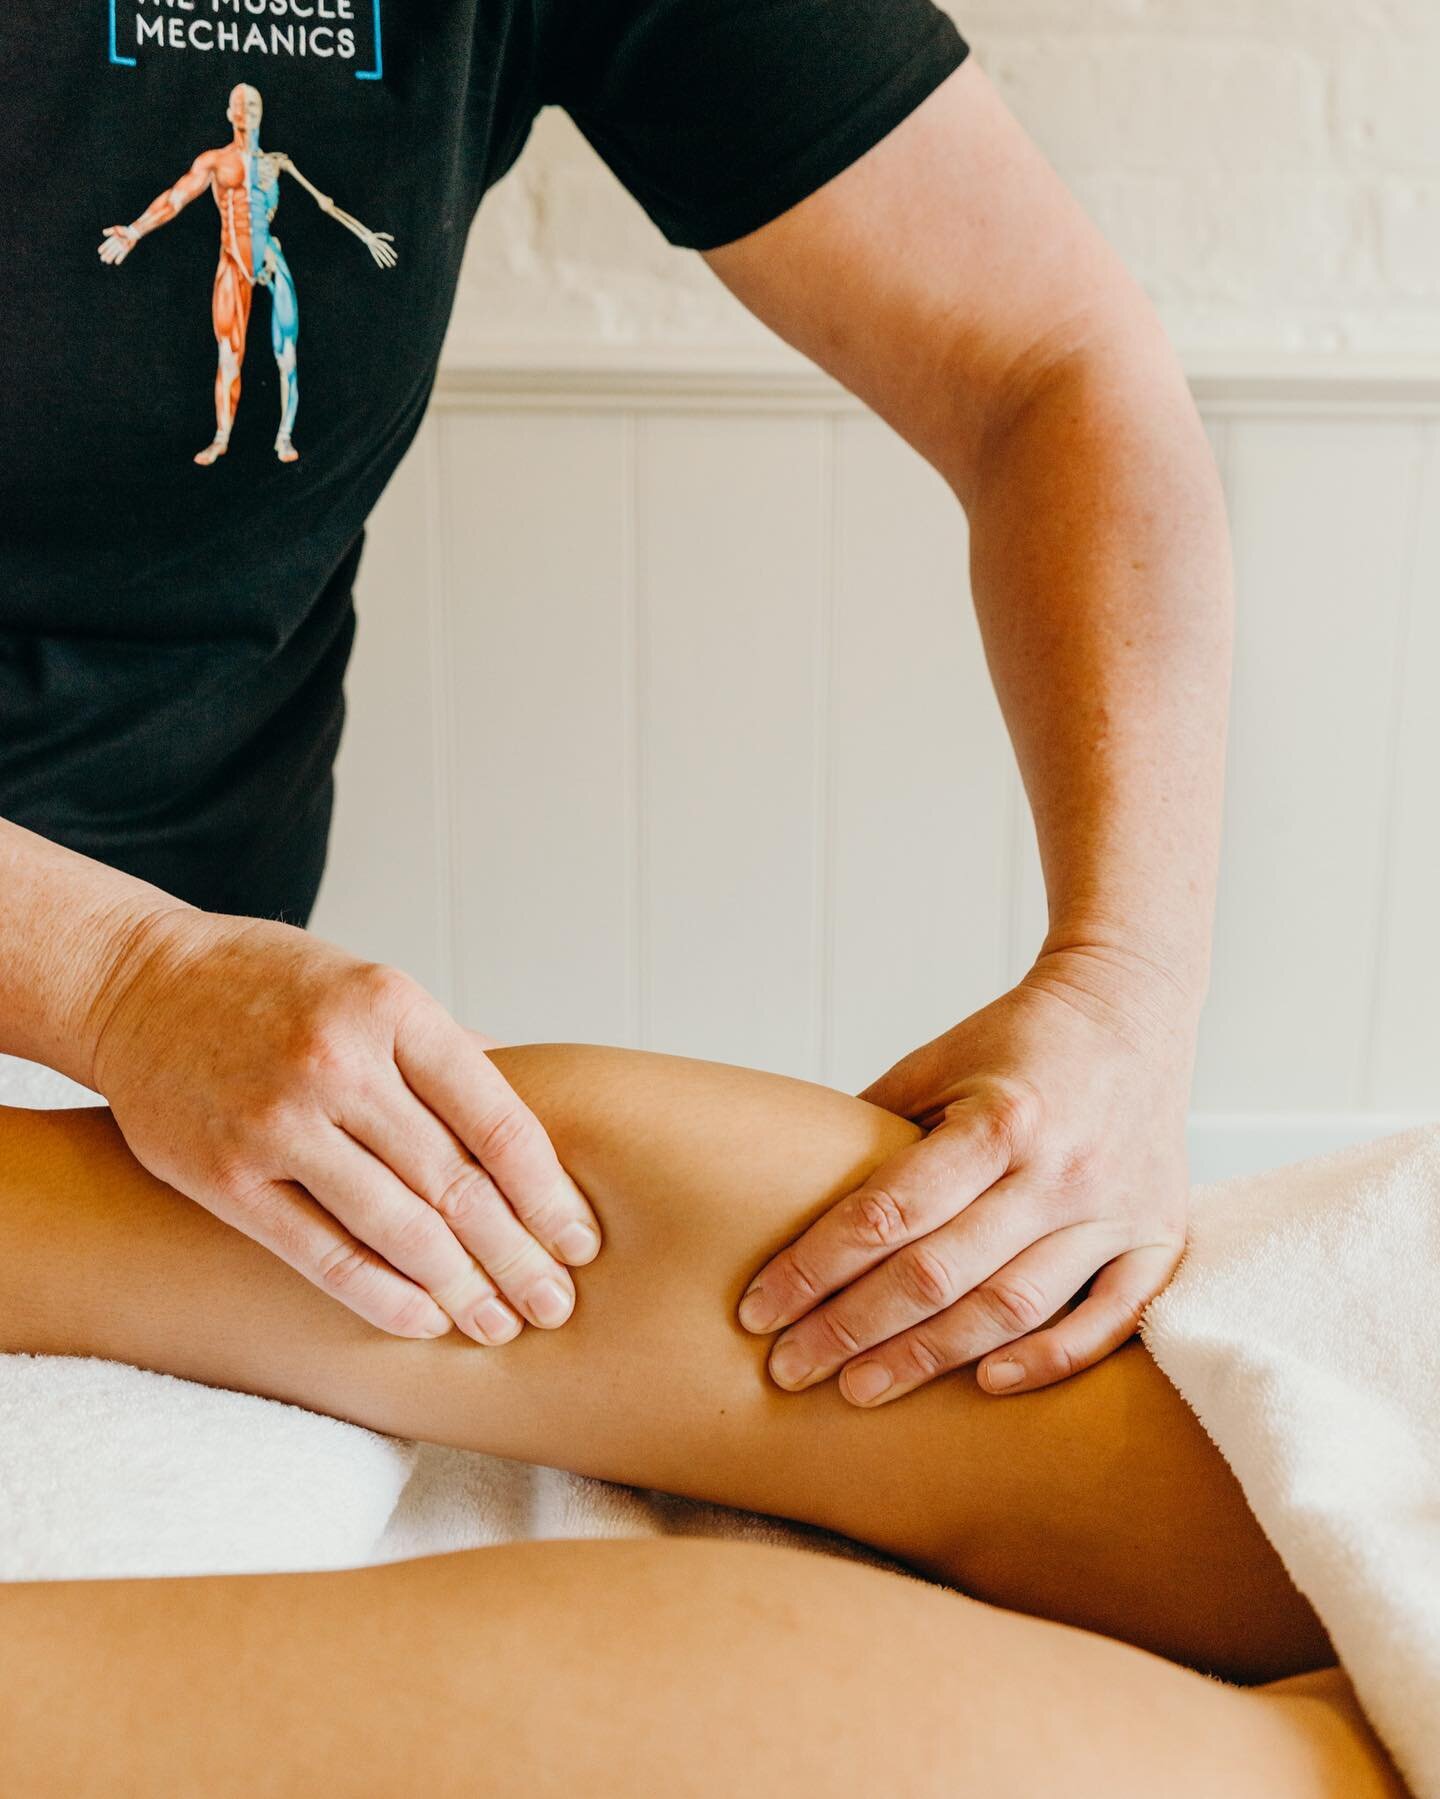 Lymphatic Drainage is now available at @the_muscle_mechanics   #spreadtheword  There’s a big lack of Lymphatic Drainage qualified practitioners here in Dunedin, so we are stoked that our newest therapist, Stacey, is a Lymph pro!   Lymphatic M